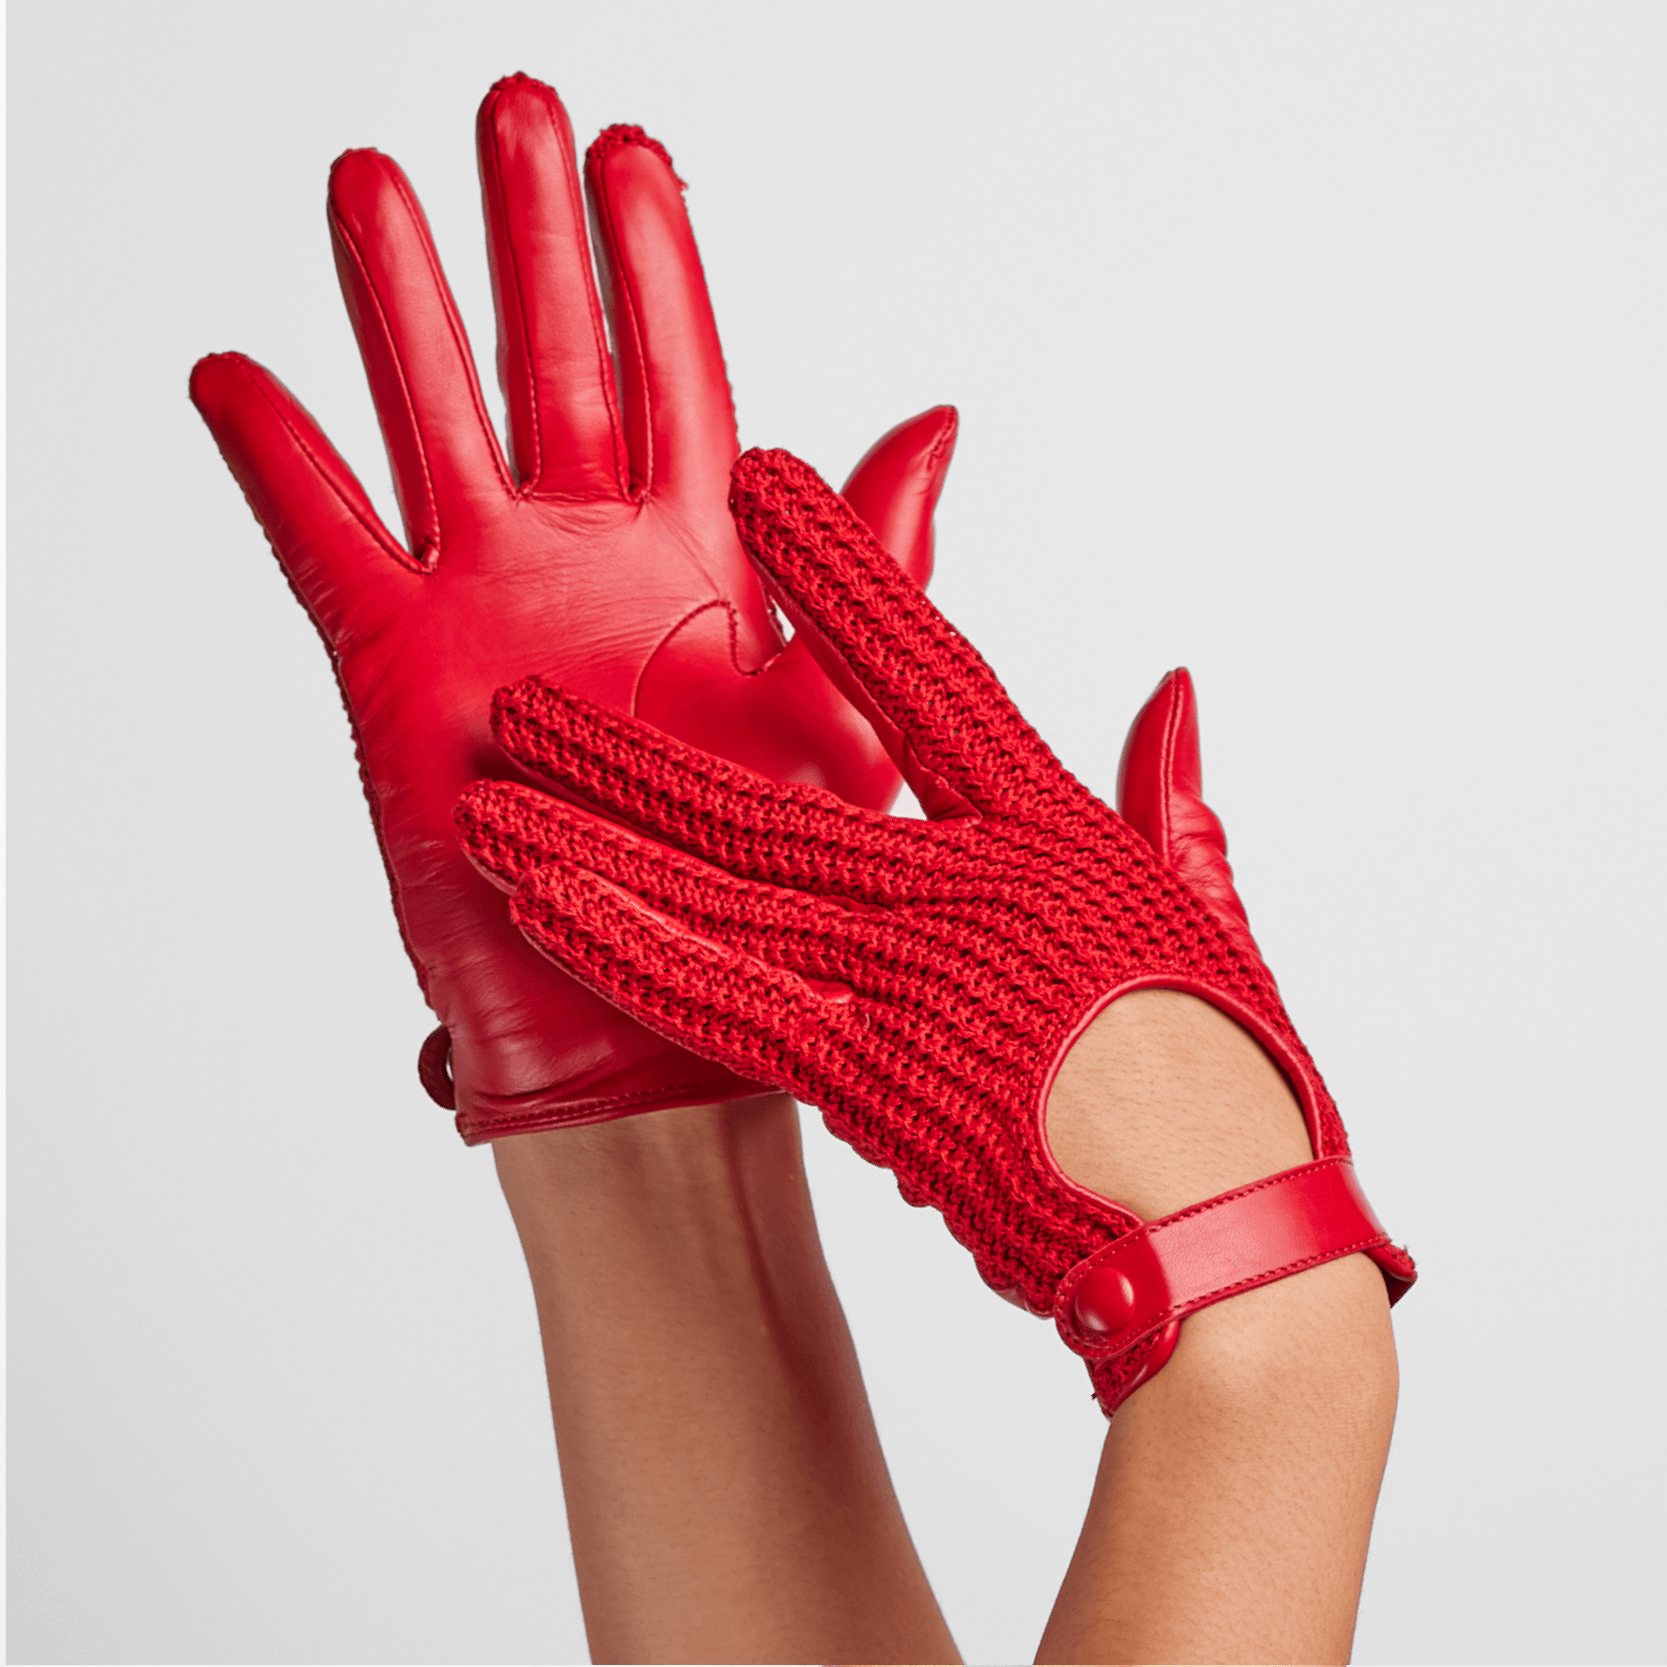 Red Isabella Gloves by Seymoure Gloves.